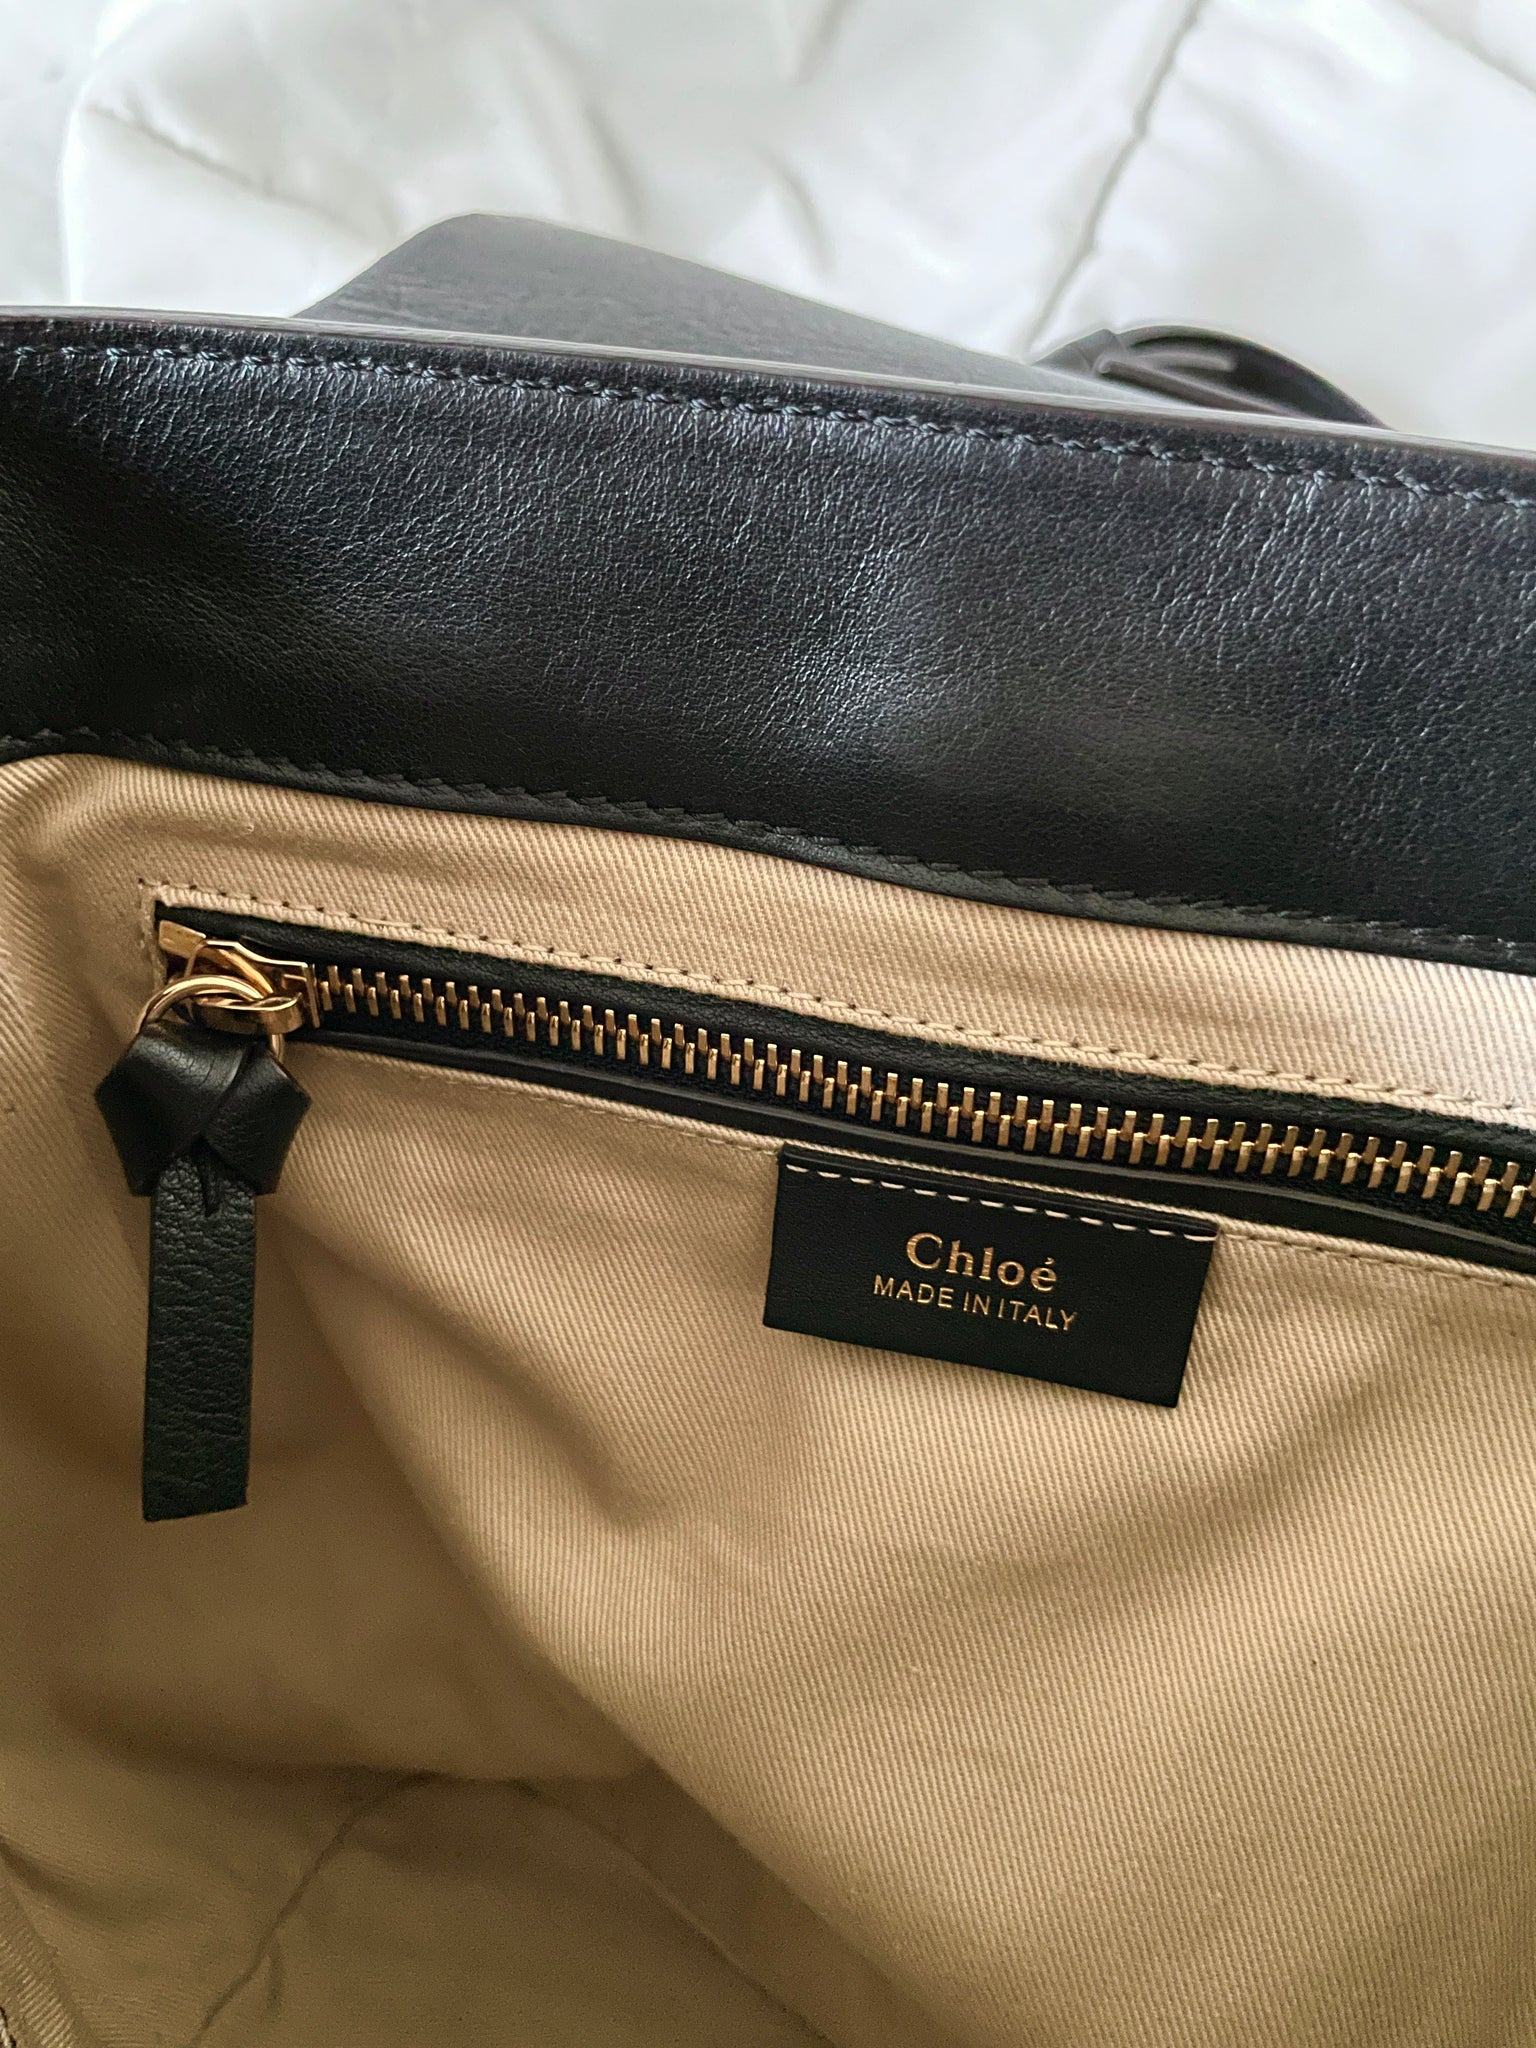 Chloe Faye Backpack Bag Reference Guide - Spotted Fashion